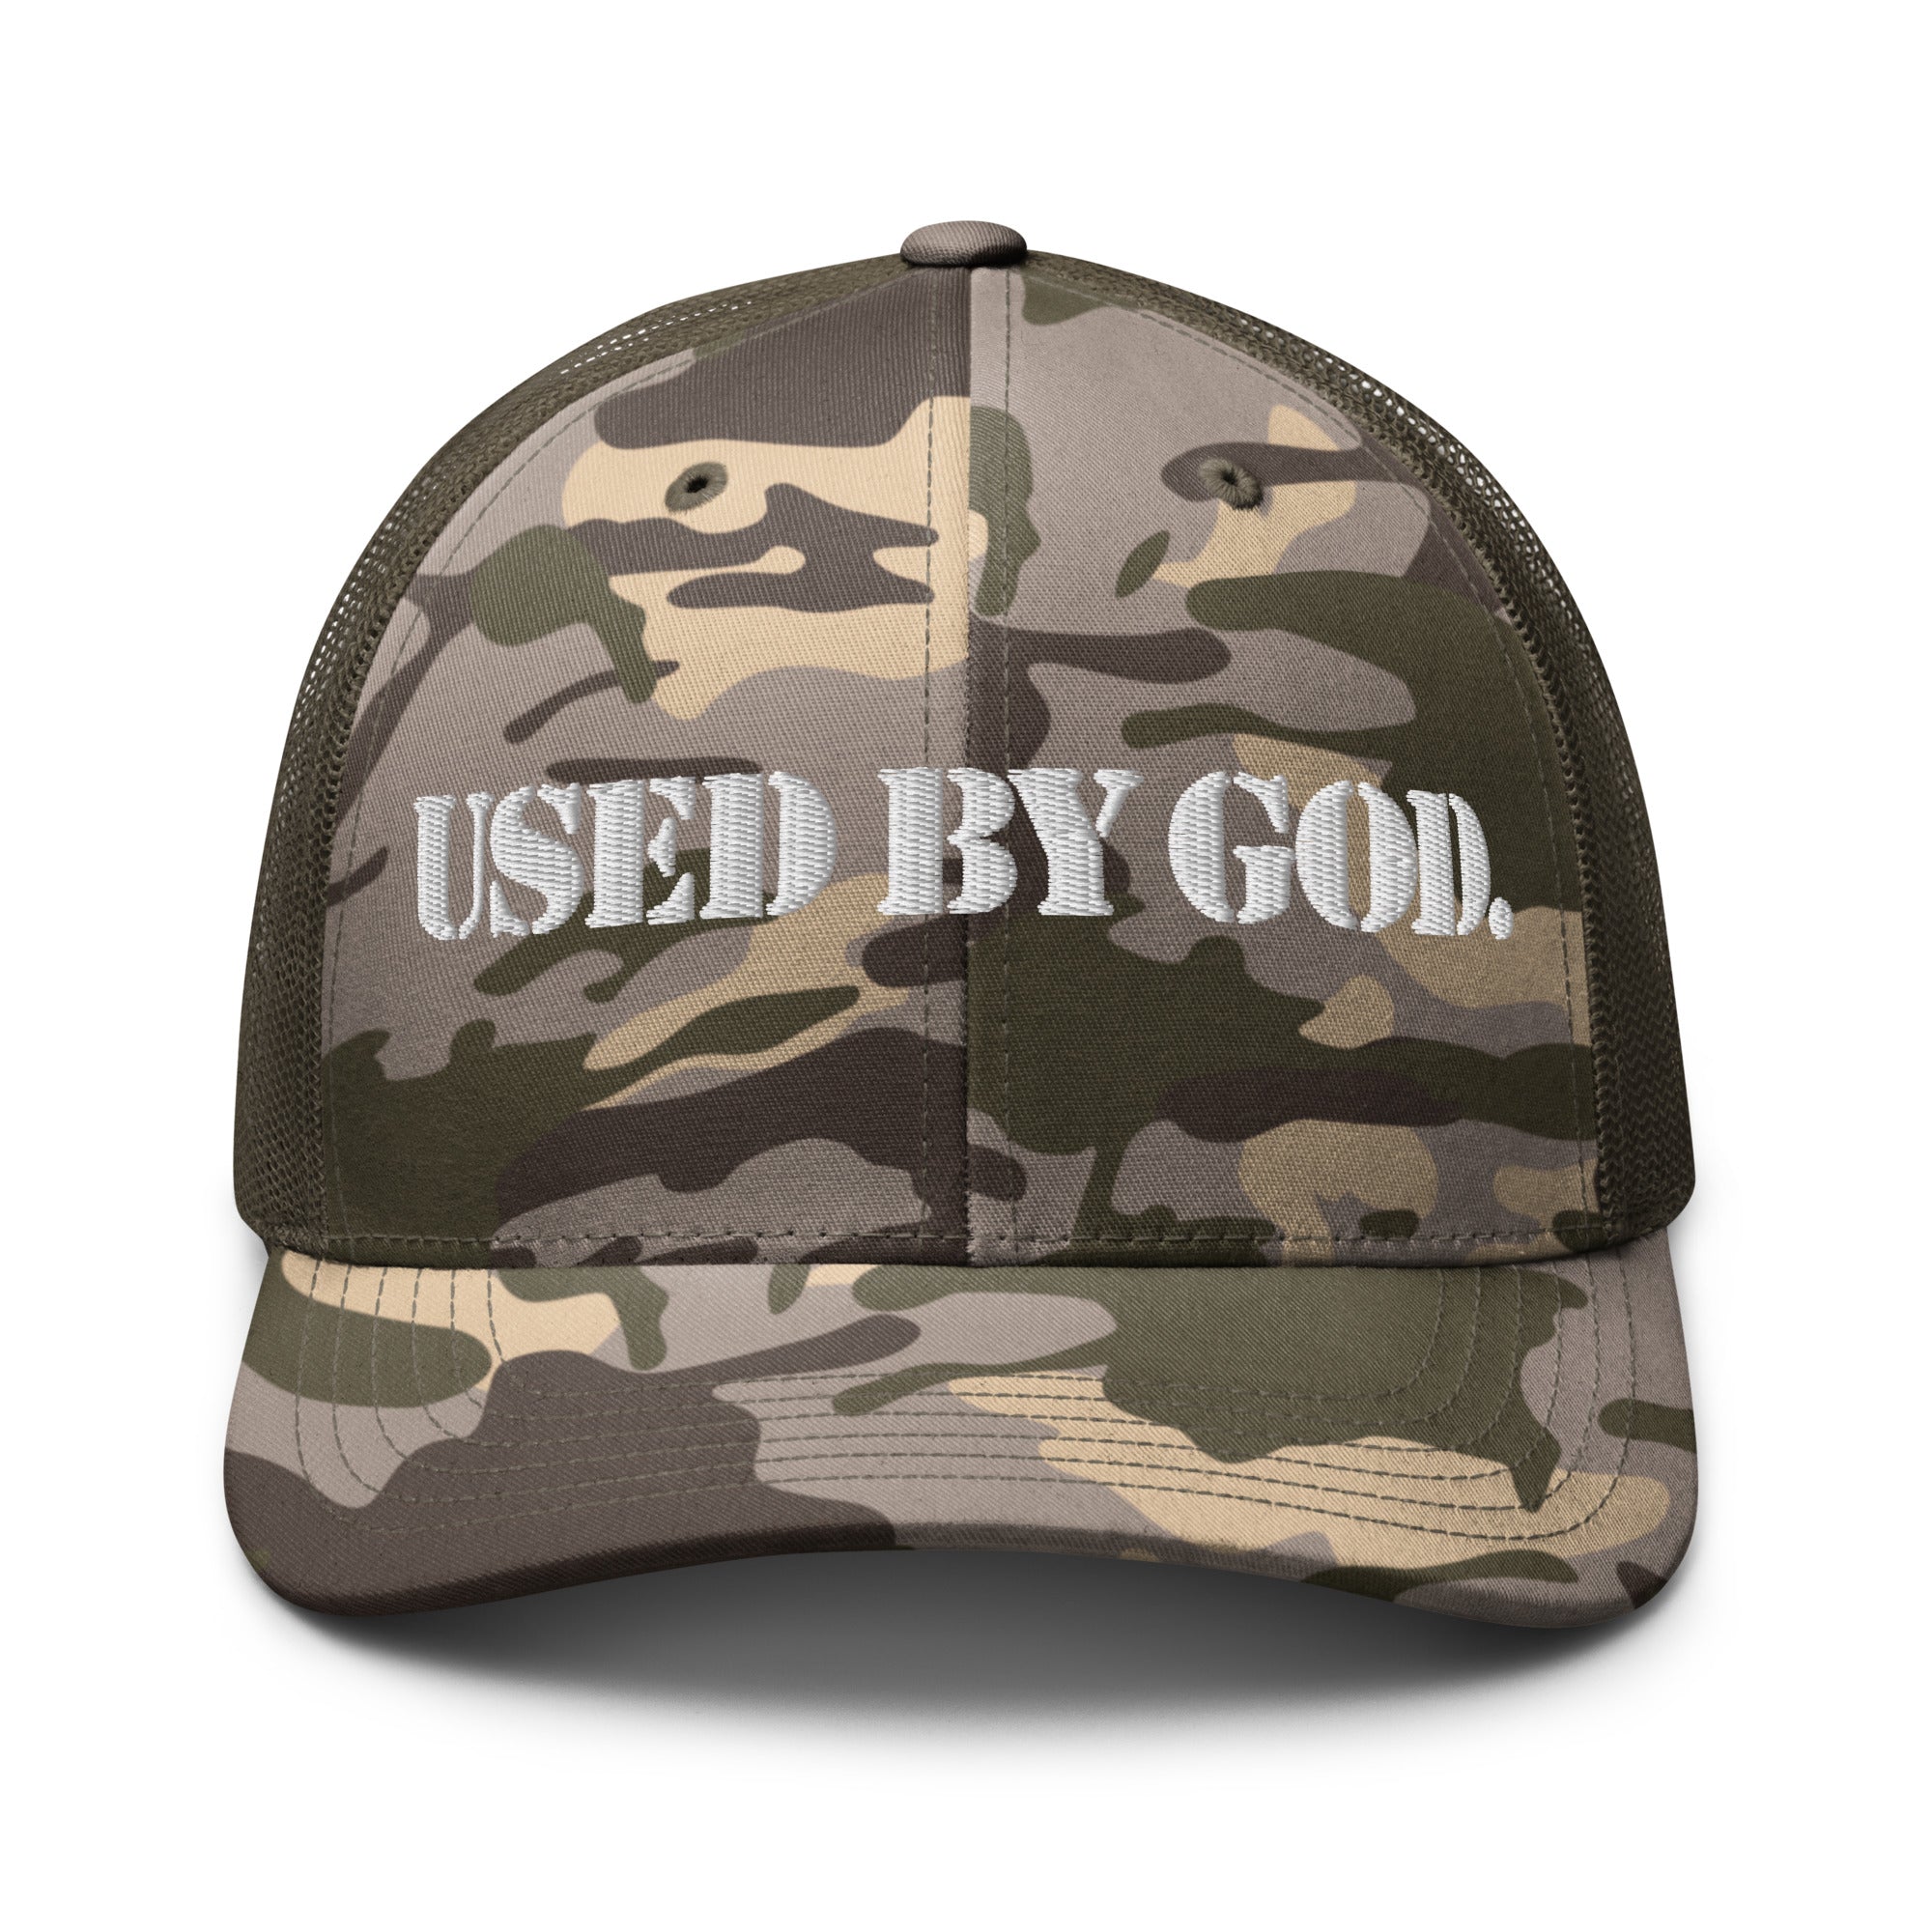 used by god clothing, god is dope, active faith sports, red letter clothing, art of homage, elevated faith, christian hats, christian apparel, christian t-shirts